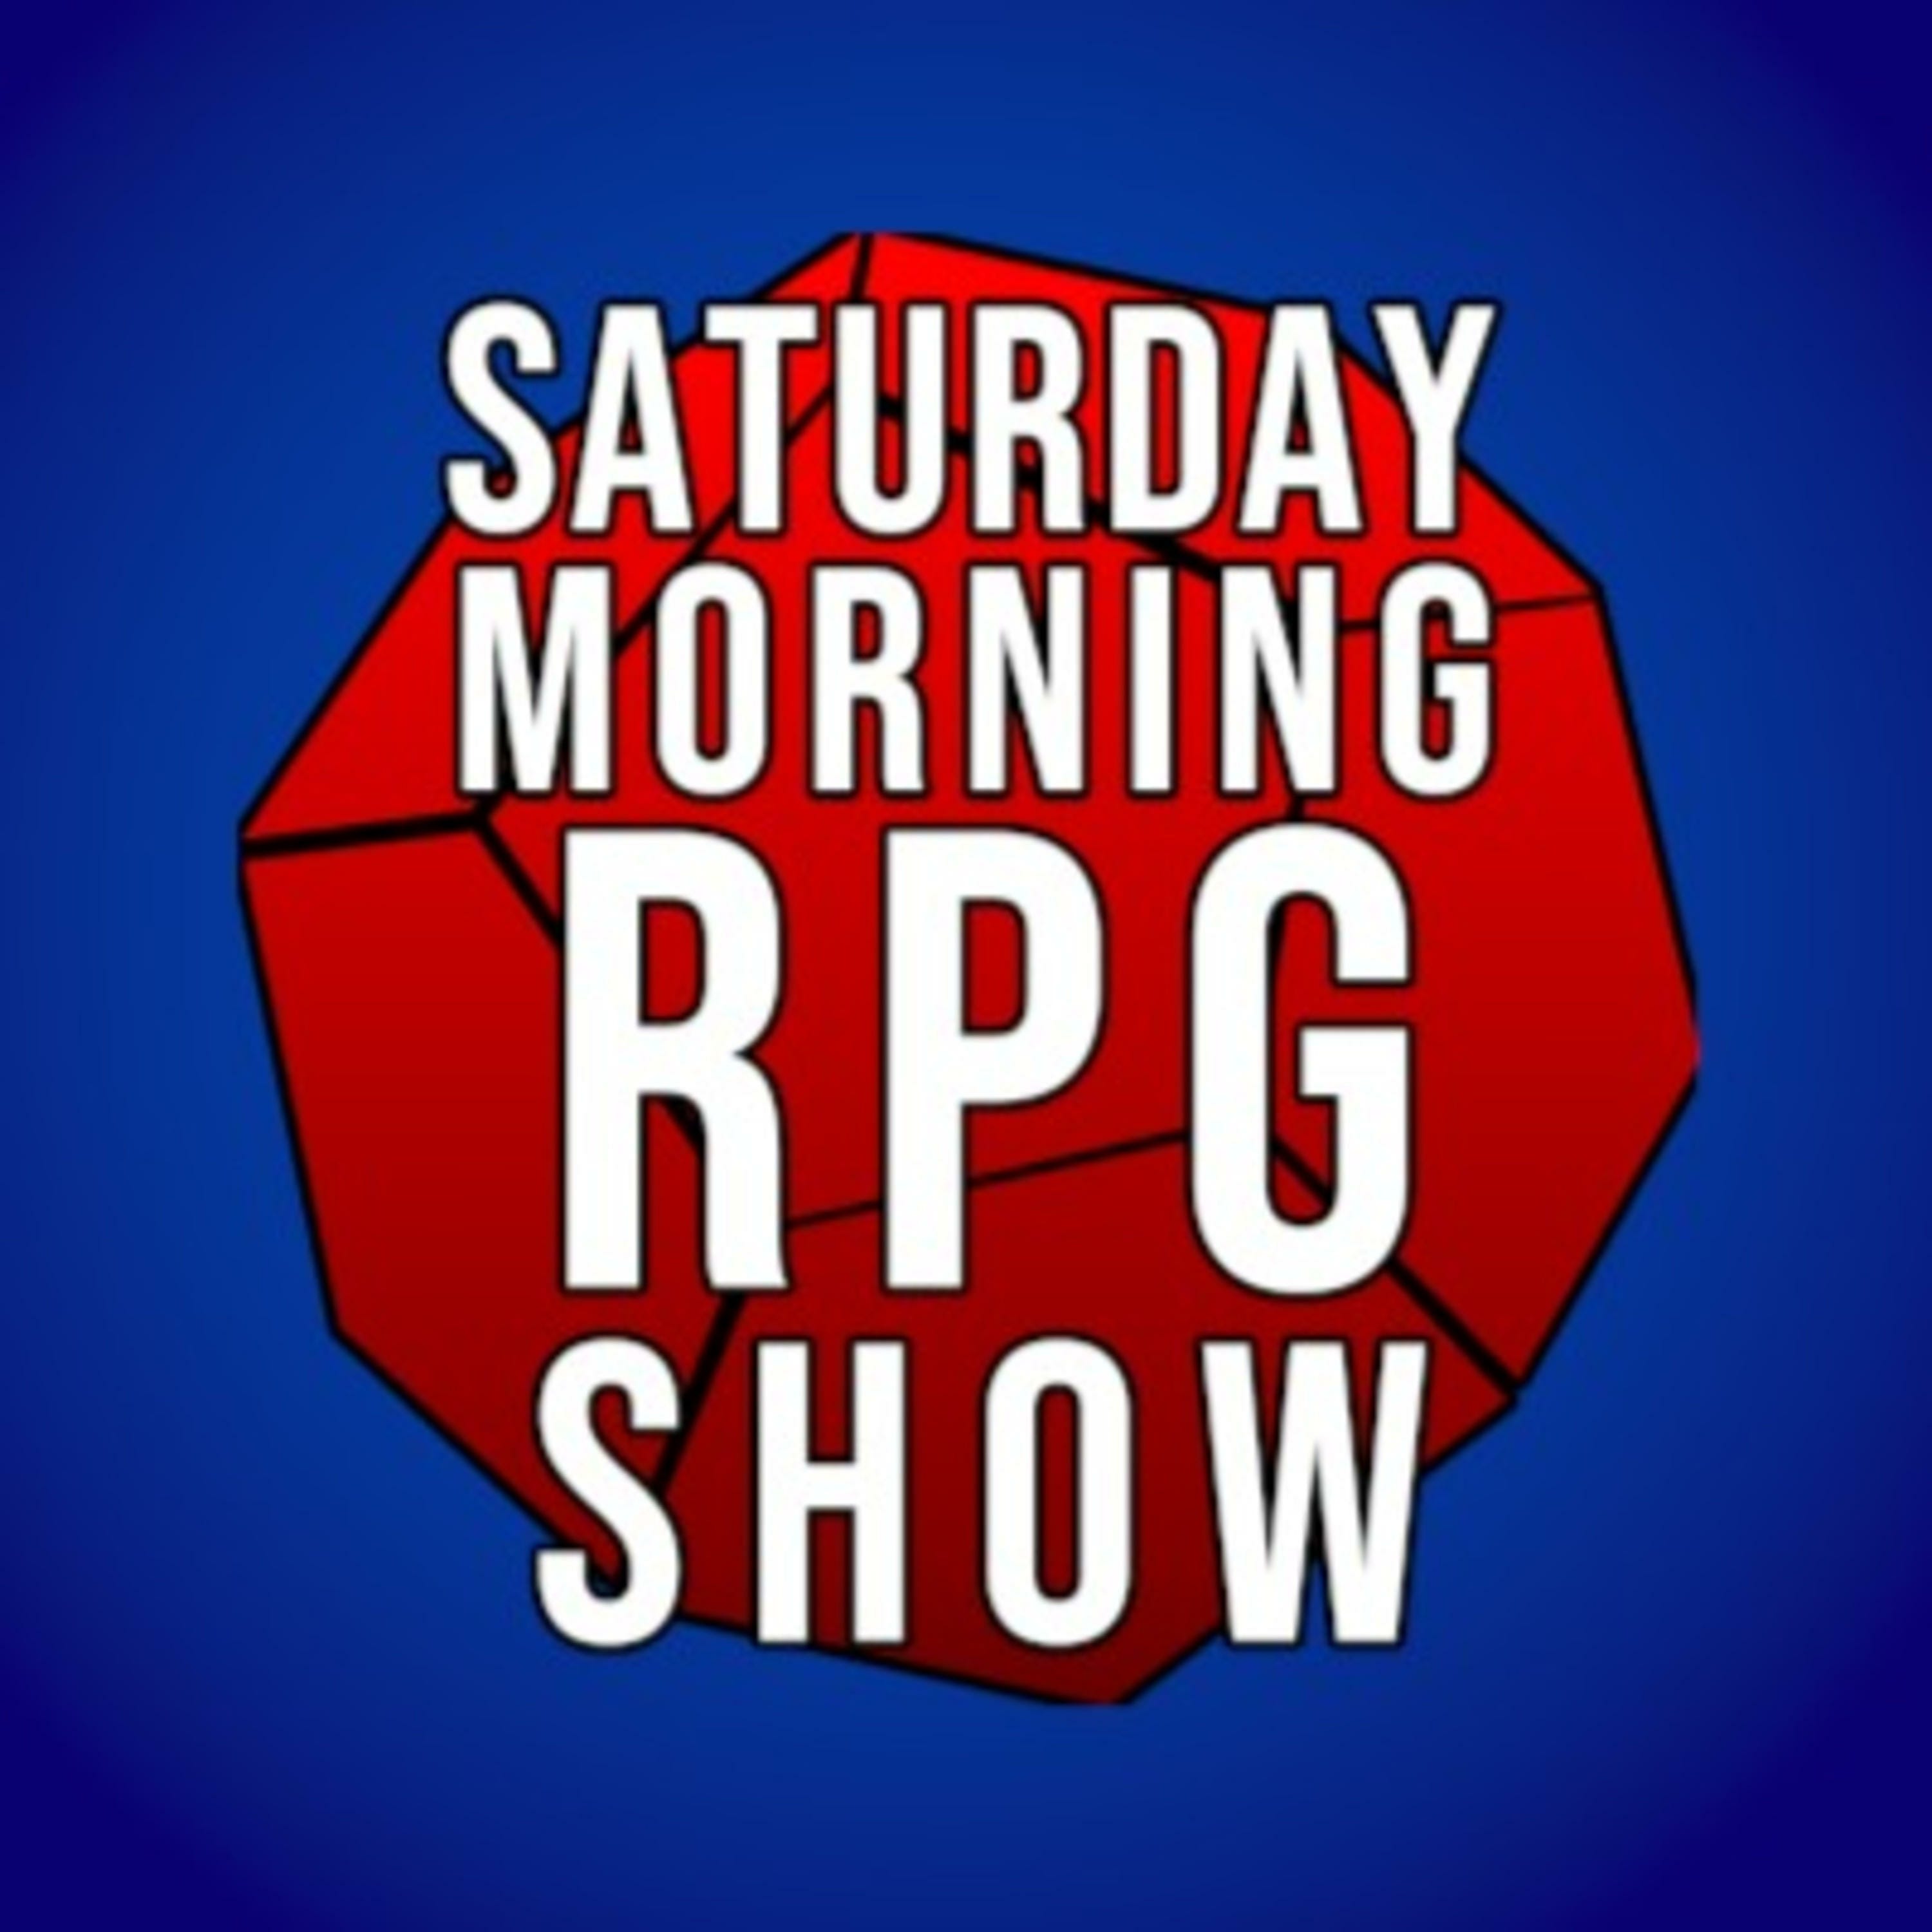 Ep 142 - World Building, Magic the Gathering, and Freaky Friday!